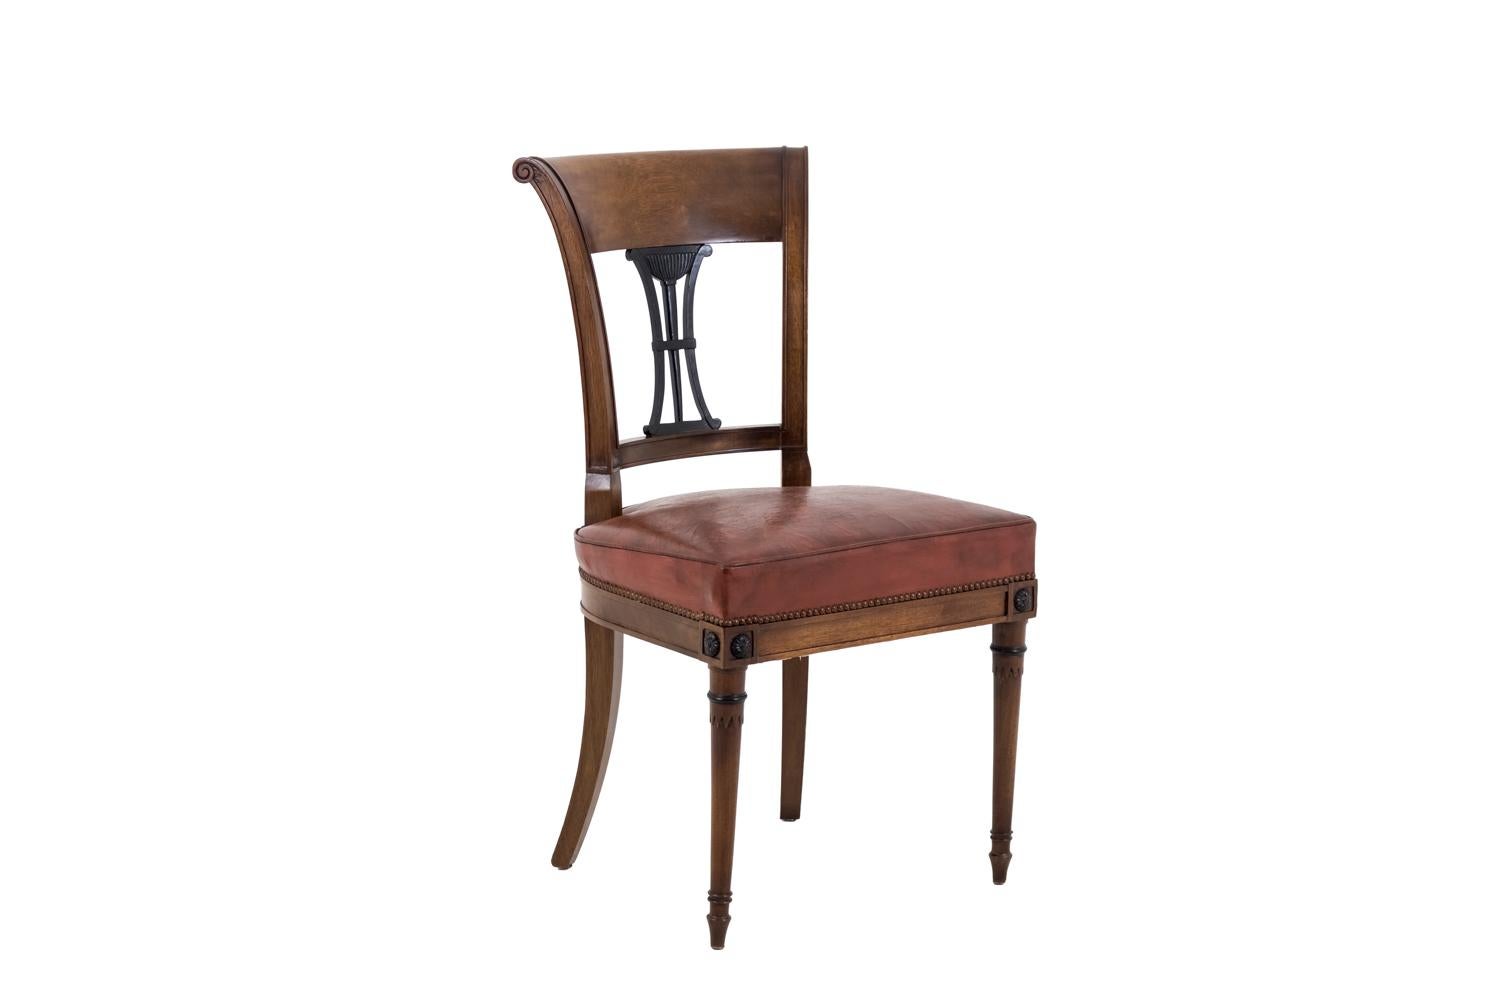 Set of 6 Directoire style chairs in mahogany, standing on two saber-shaped rear legs and two front round and tapered legs: front tapered legs with rings and topped by joints decorated with darkened rosette. Moulded straight apron. Back top rail